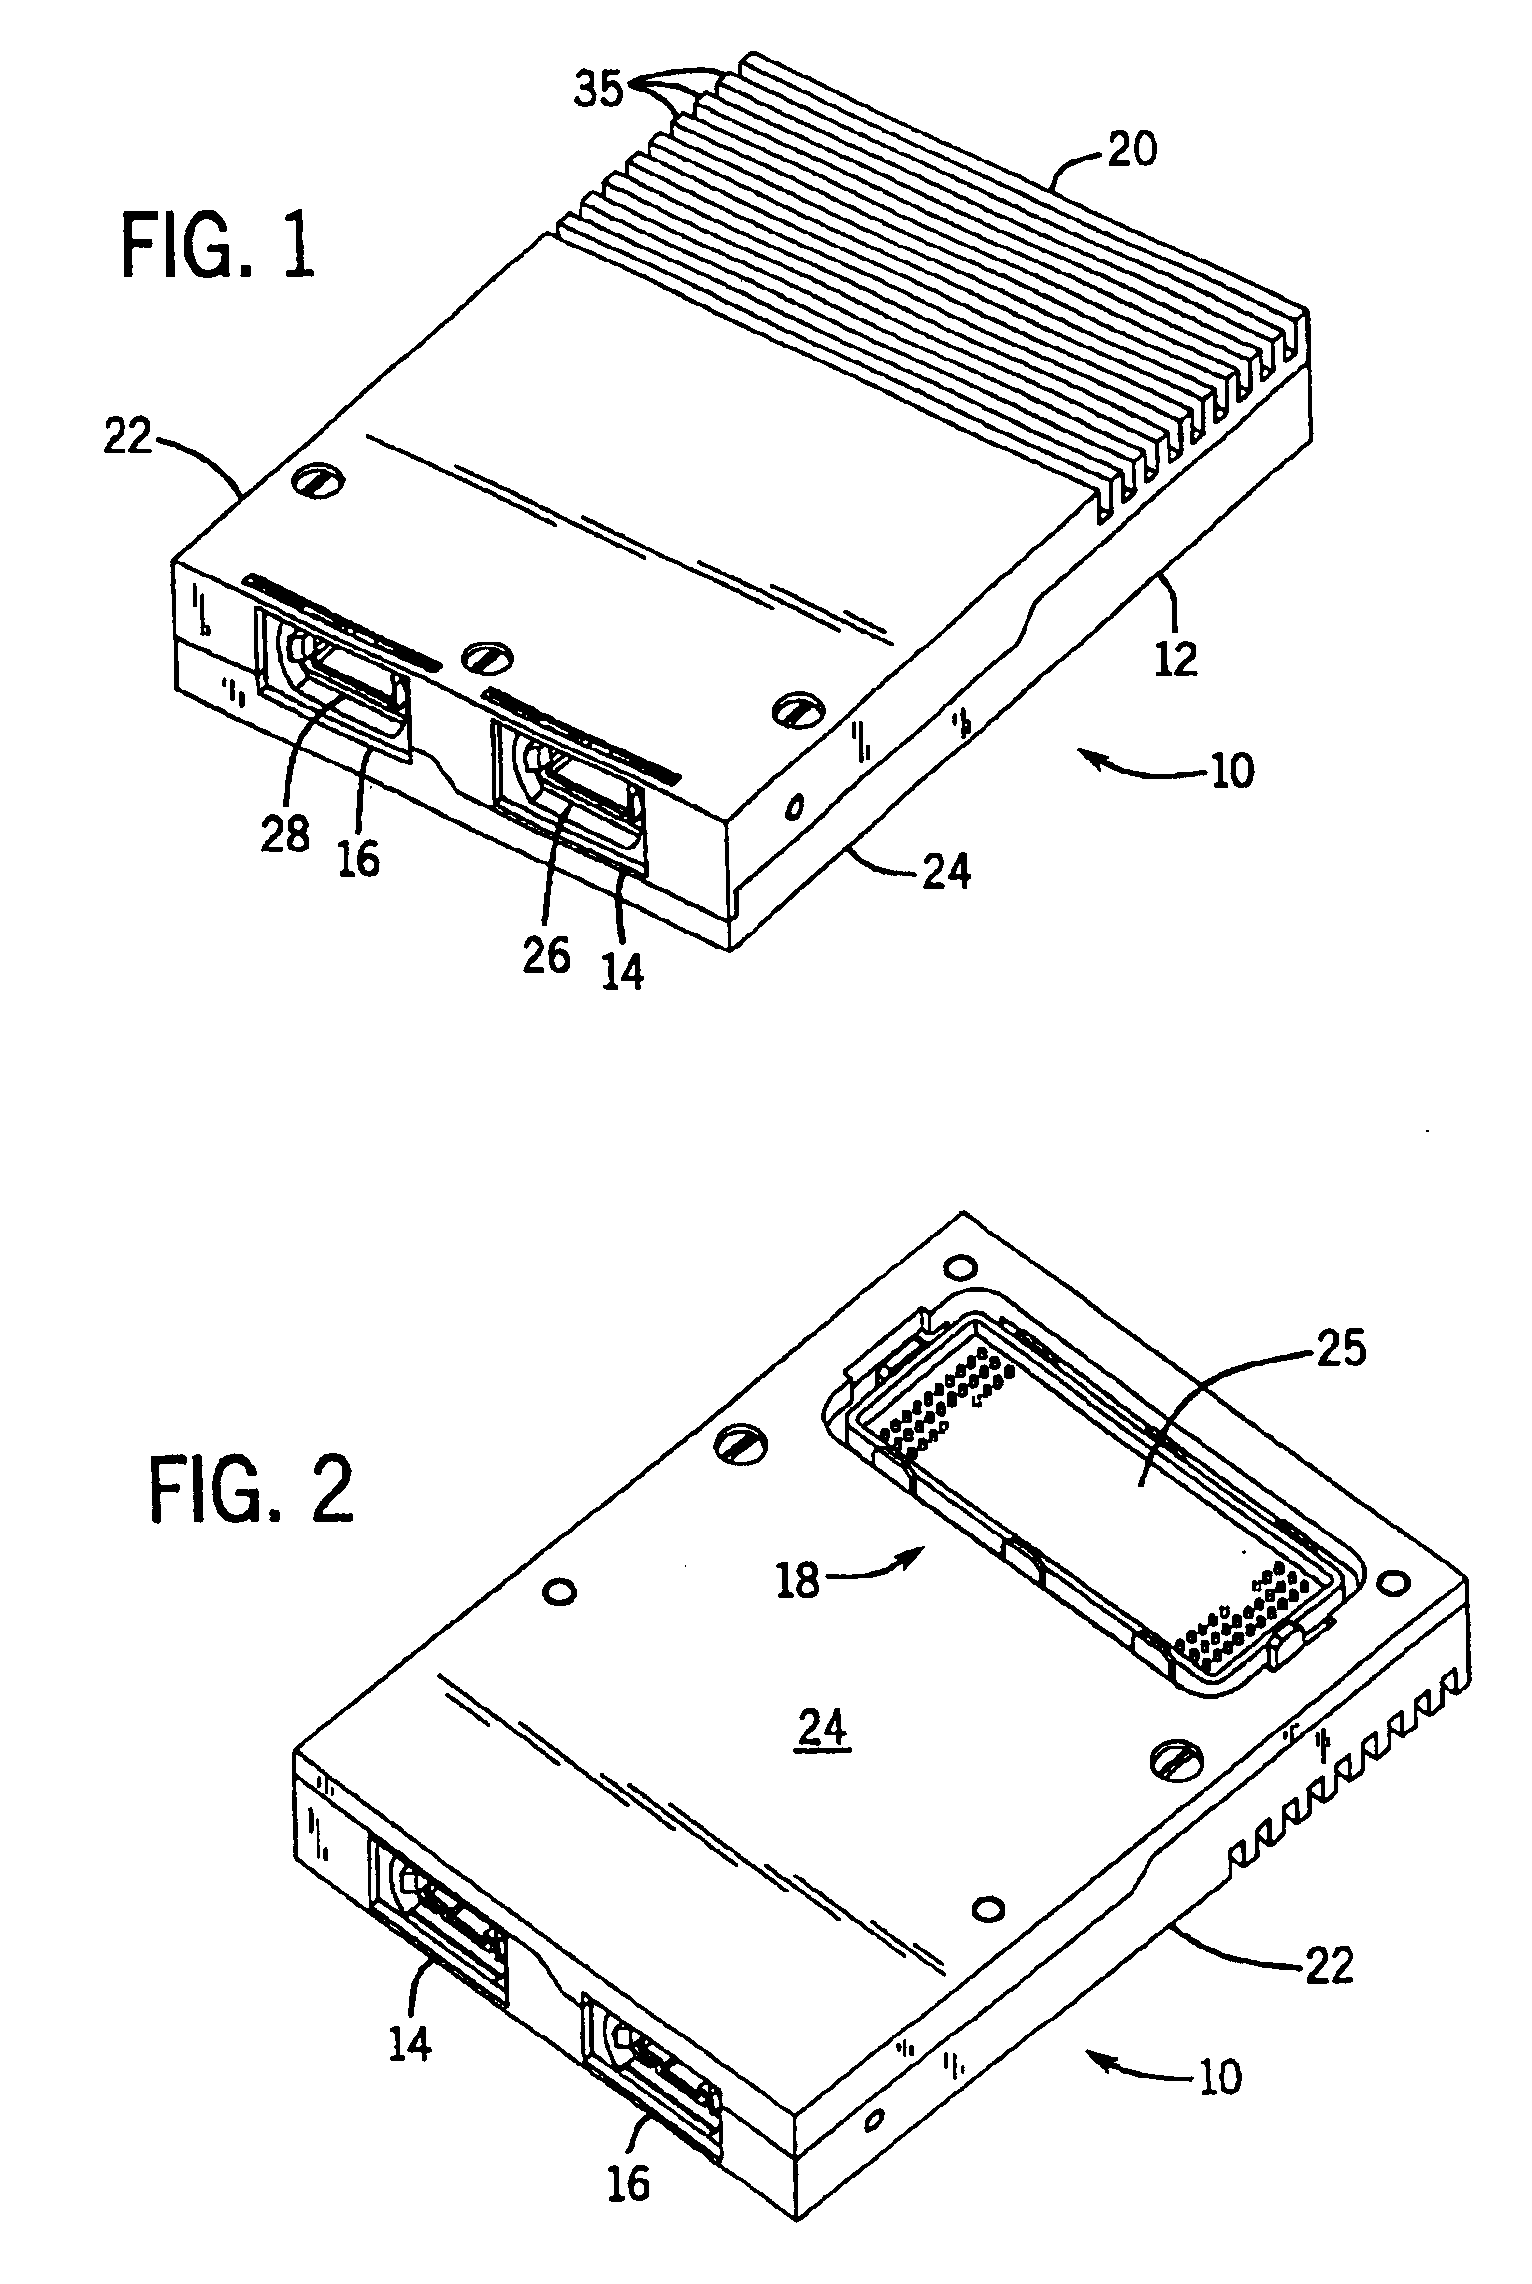 Circuit board construction for use in small form factor fiber optic communication system transponders